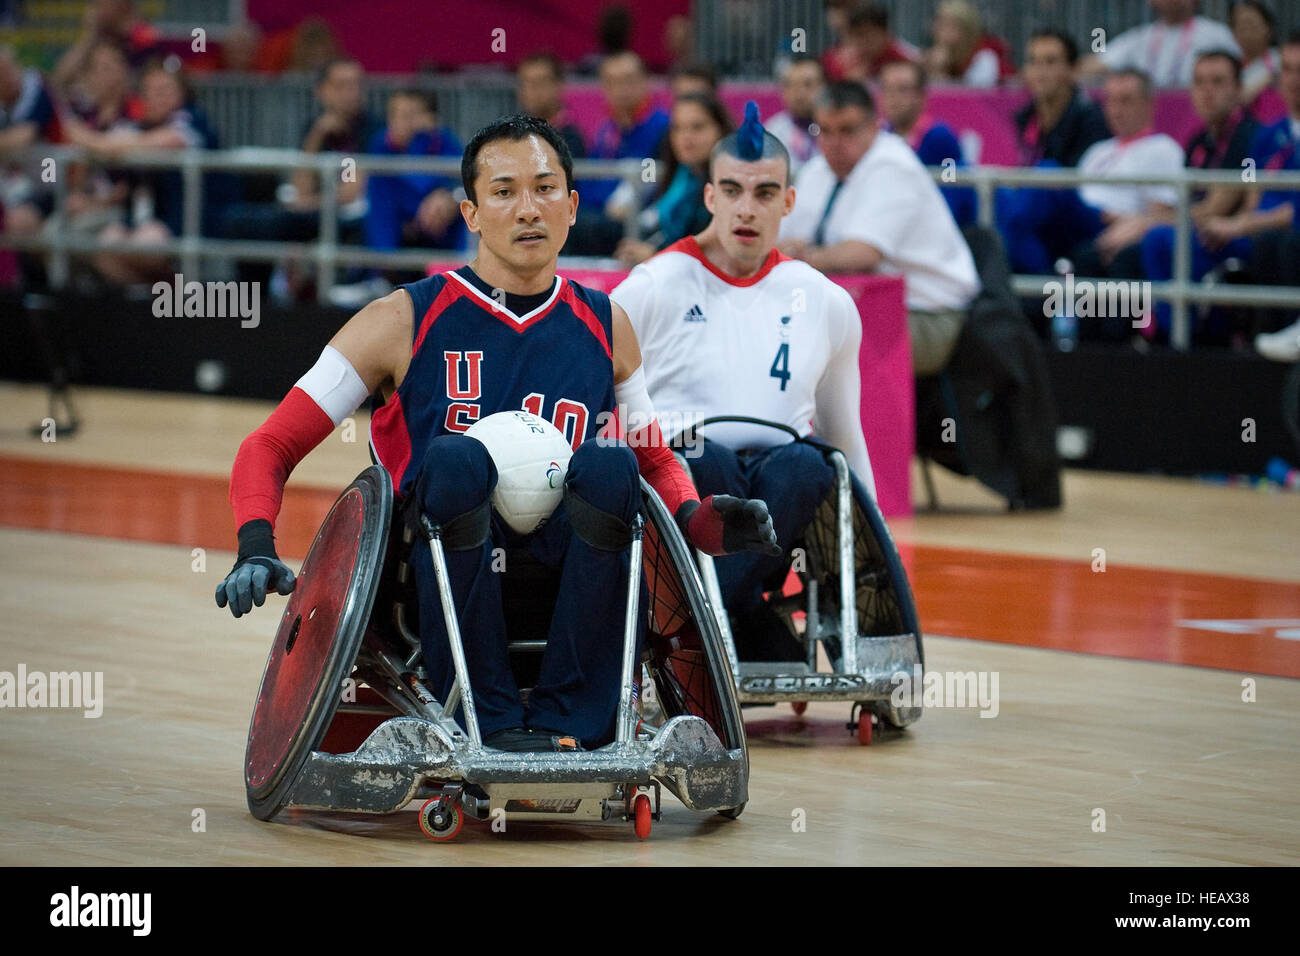 Retired U.S. Sailor William Groulx, left, the U.S. wheelchair rugby team captain, heads toward the goal to score a point against the Great Britain team during a match at the Paralympic Games in London Sept. 5, 2012. The Paralympics is a major international sporting event in which thousands of athletes, including wounded and injured U.S. Service members, participate in a variety of sporting events.  Master Sgt. Sean M. Worrell Stock Photo